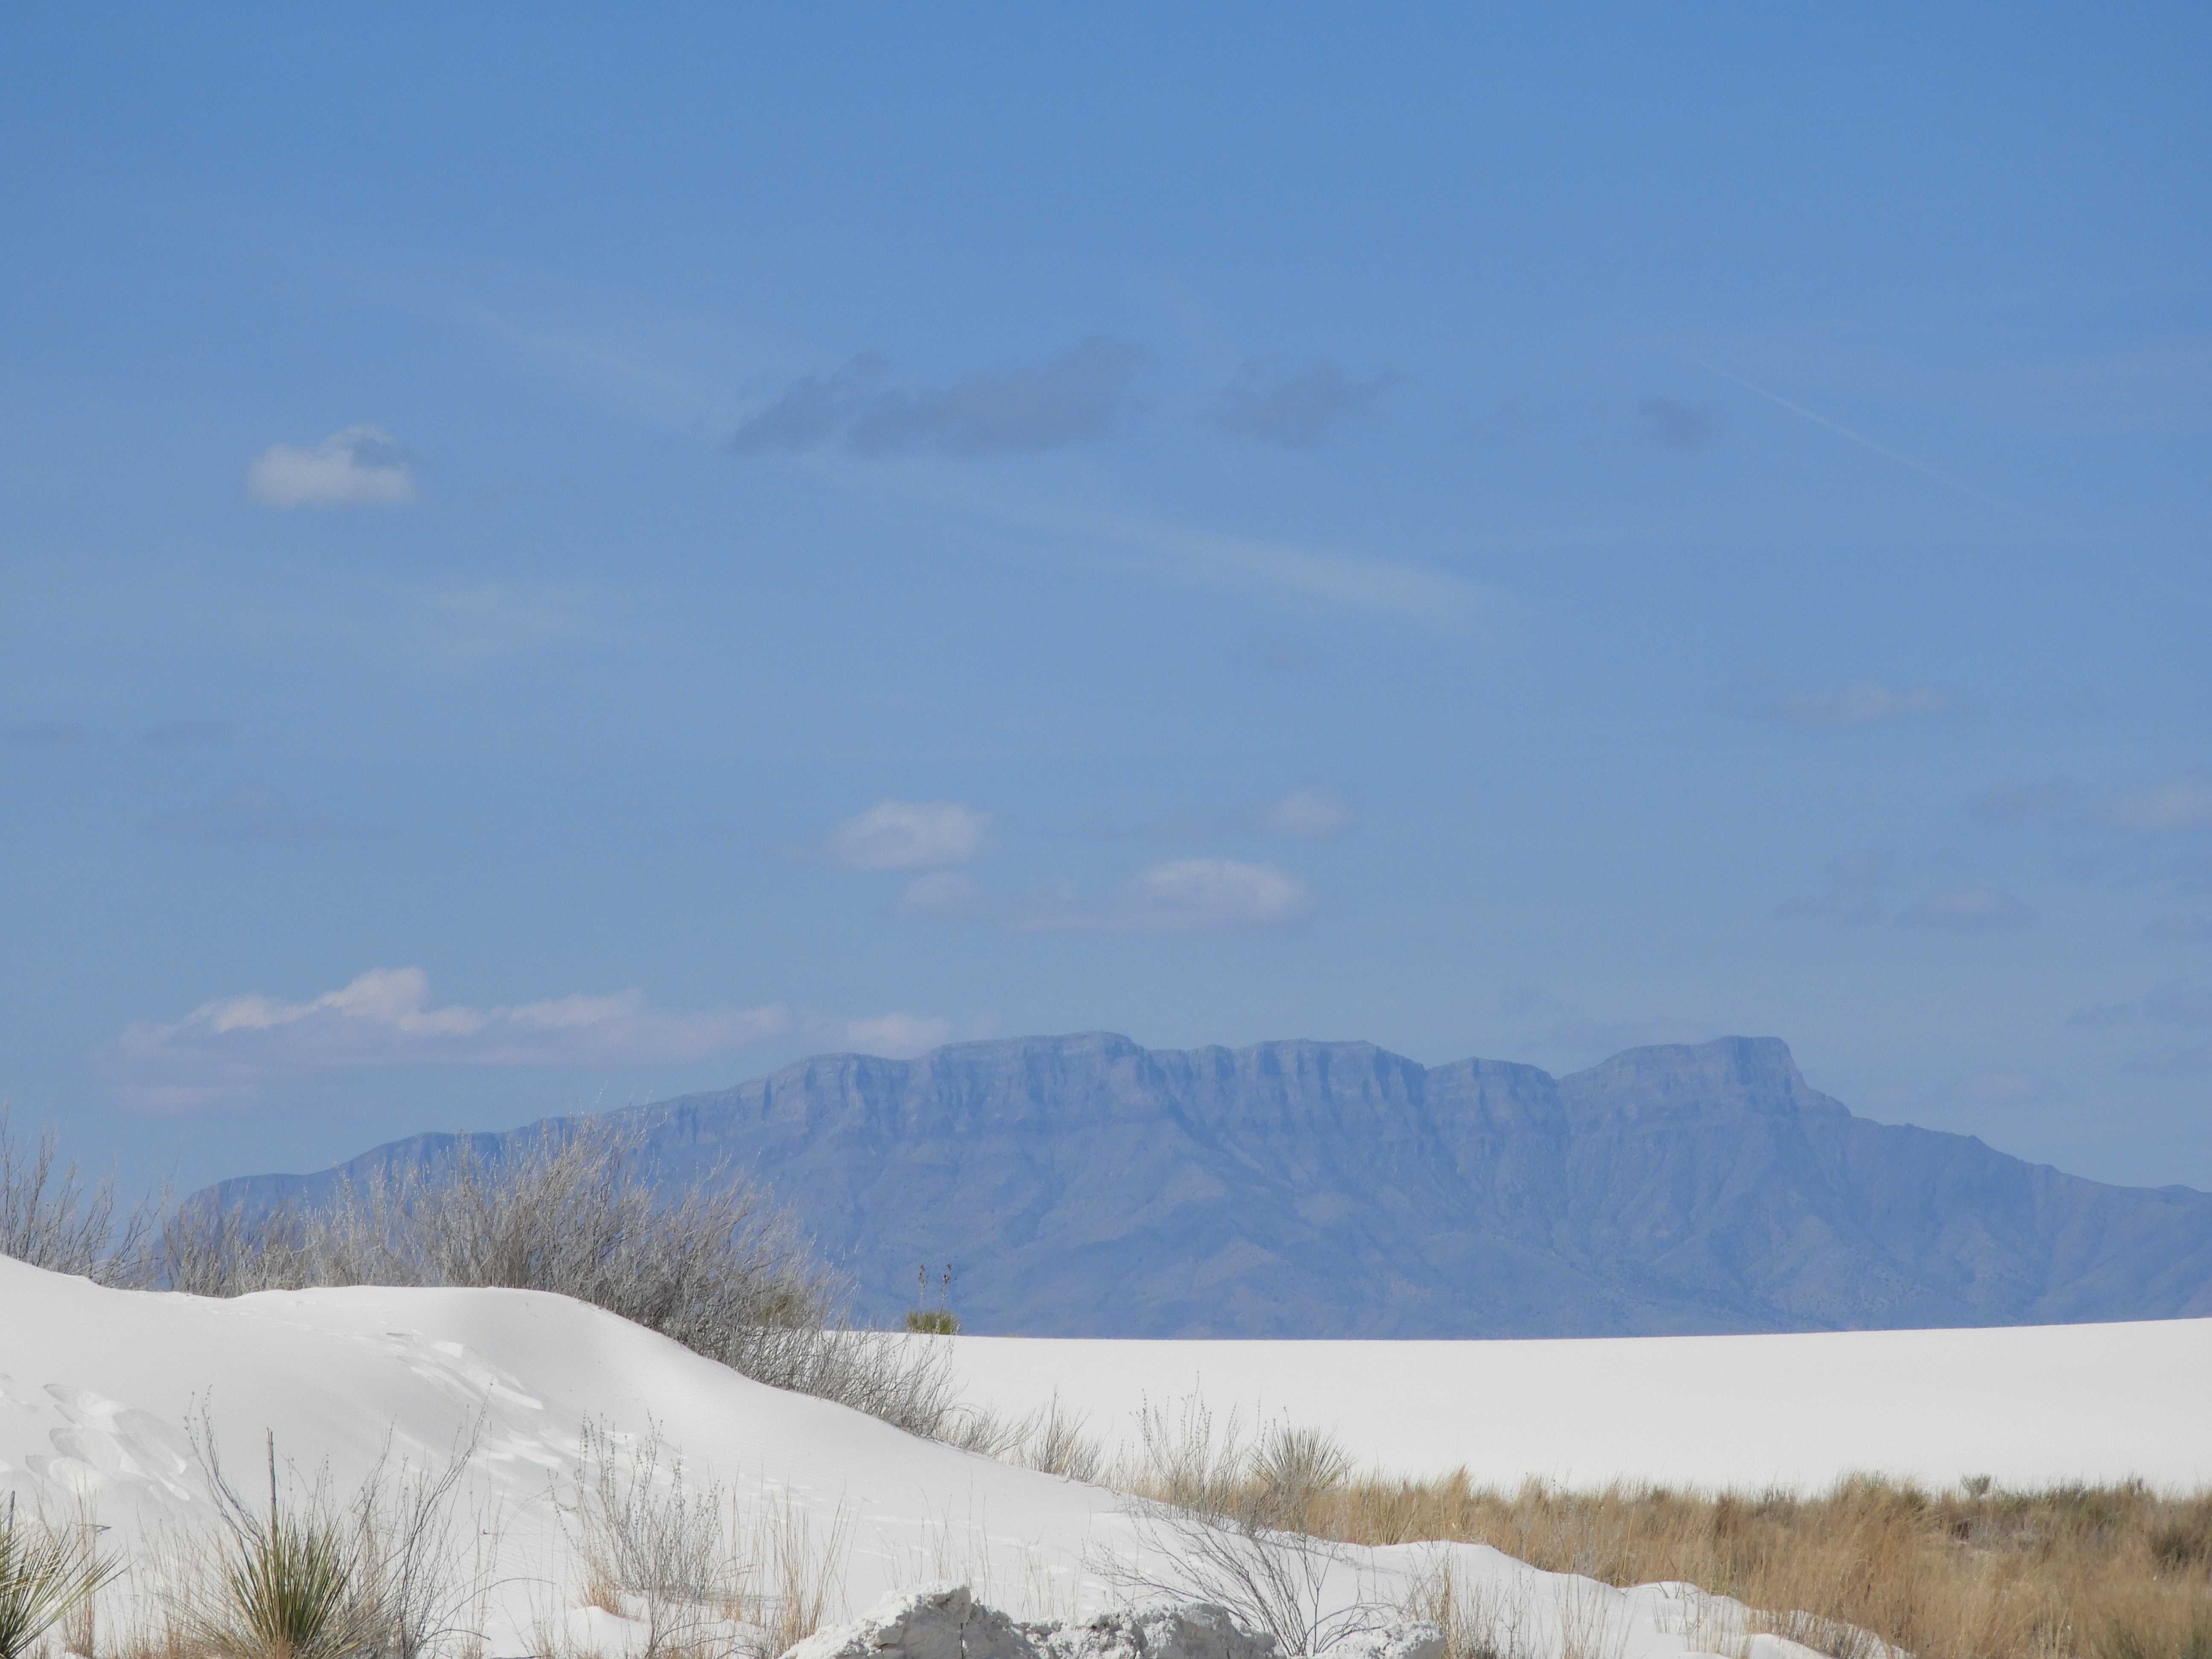 White Sands National Park in New Mexico